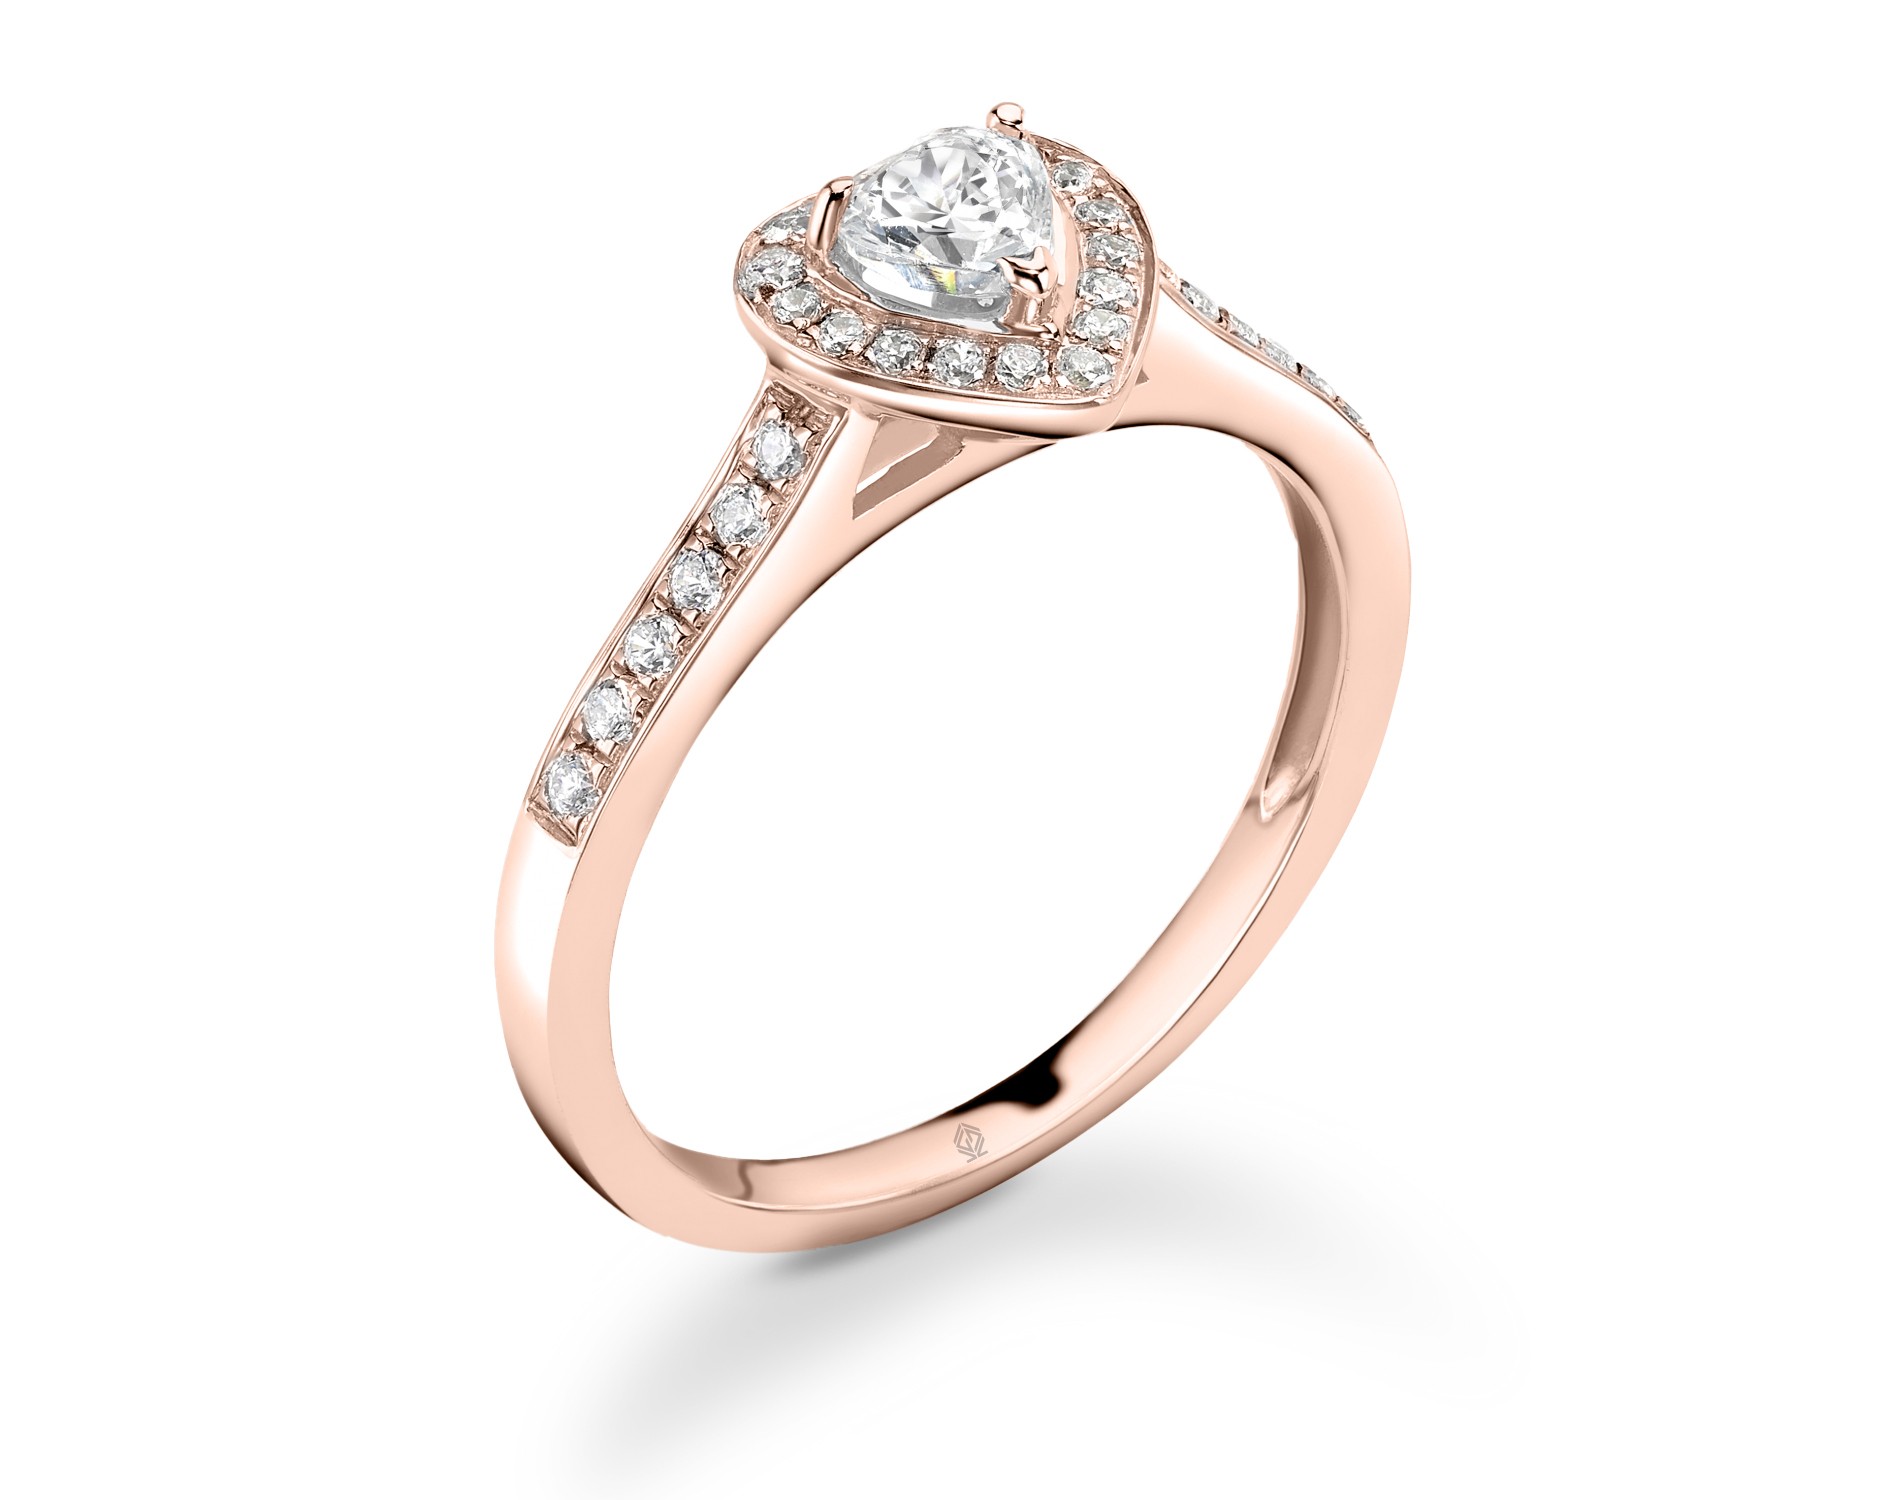 18K ROSE GOLD HEART CUT HALO DIAMOND ENGAGEMENT RING WITH SIDE STONES CHANNEL SET